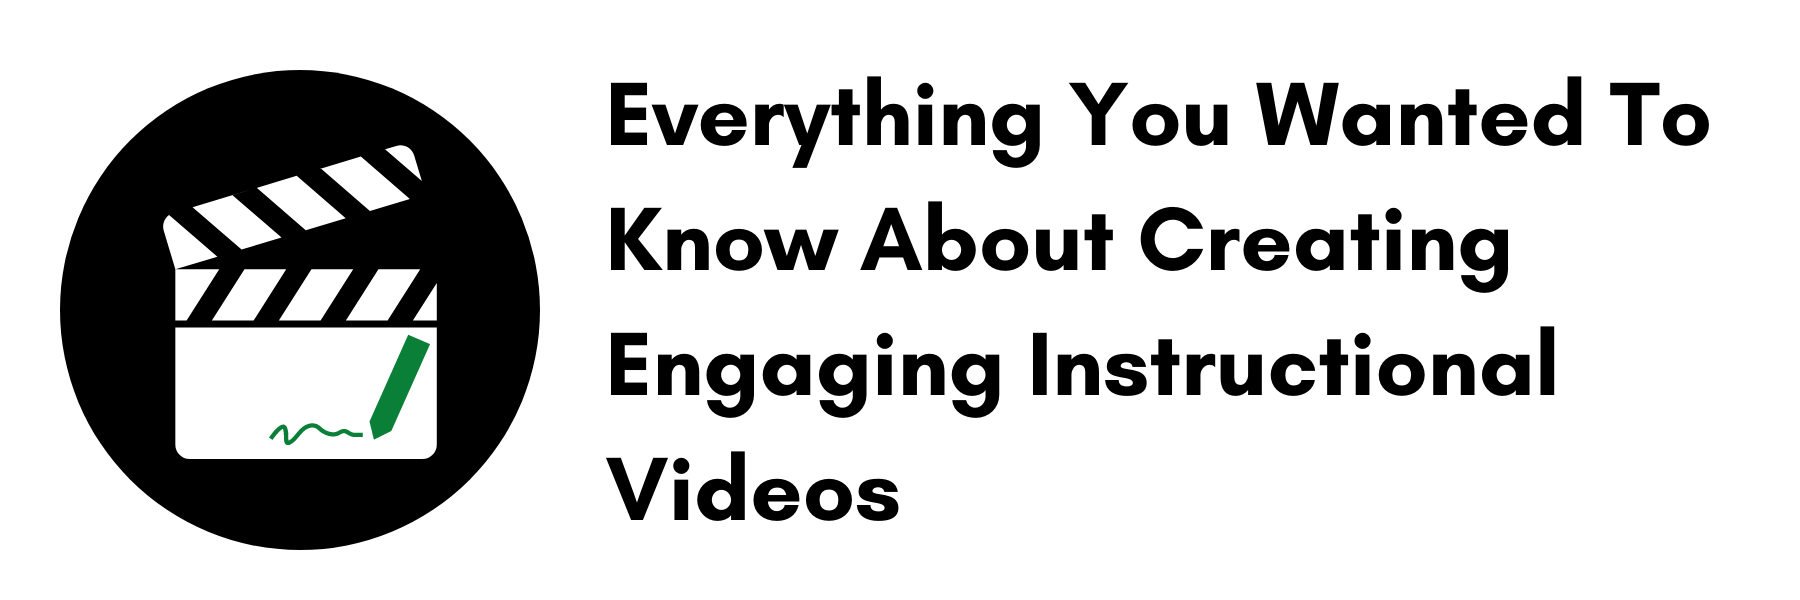 Everything You Wanted to Know About Creating Engaging Instructional Videos But Were Afraid to Ask 